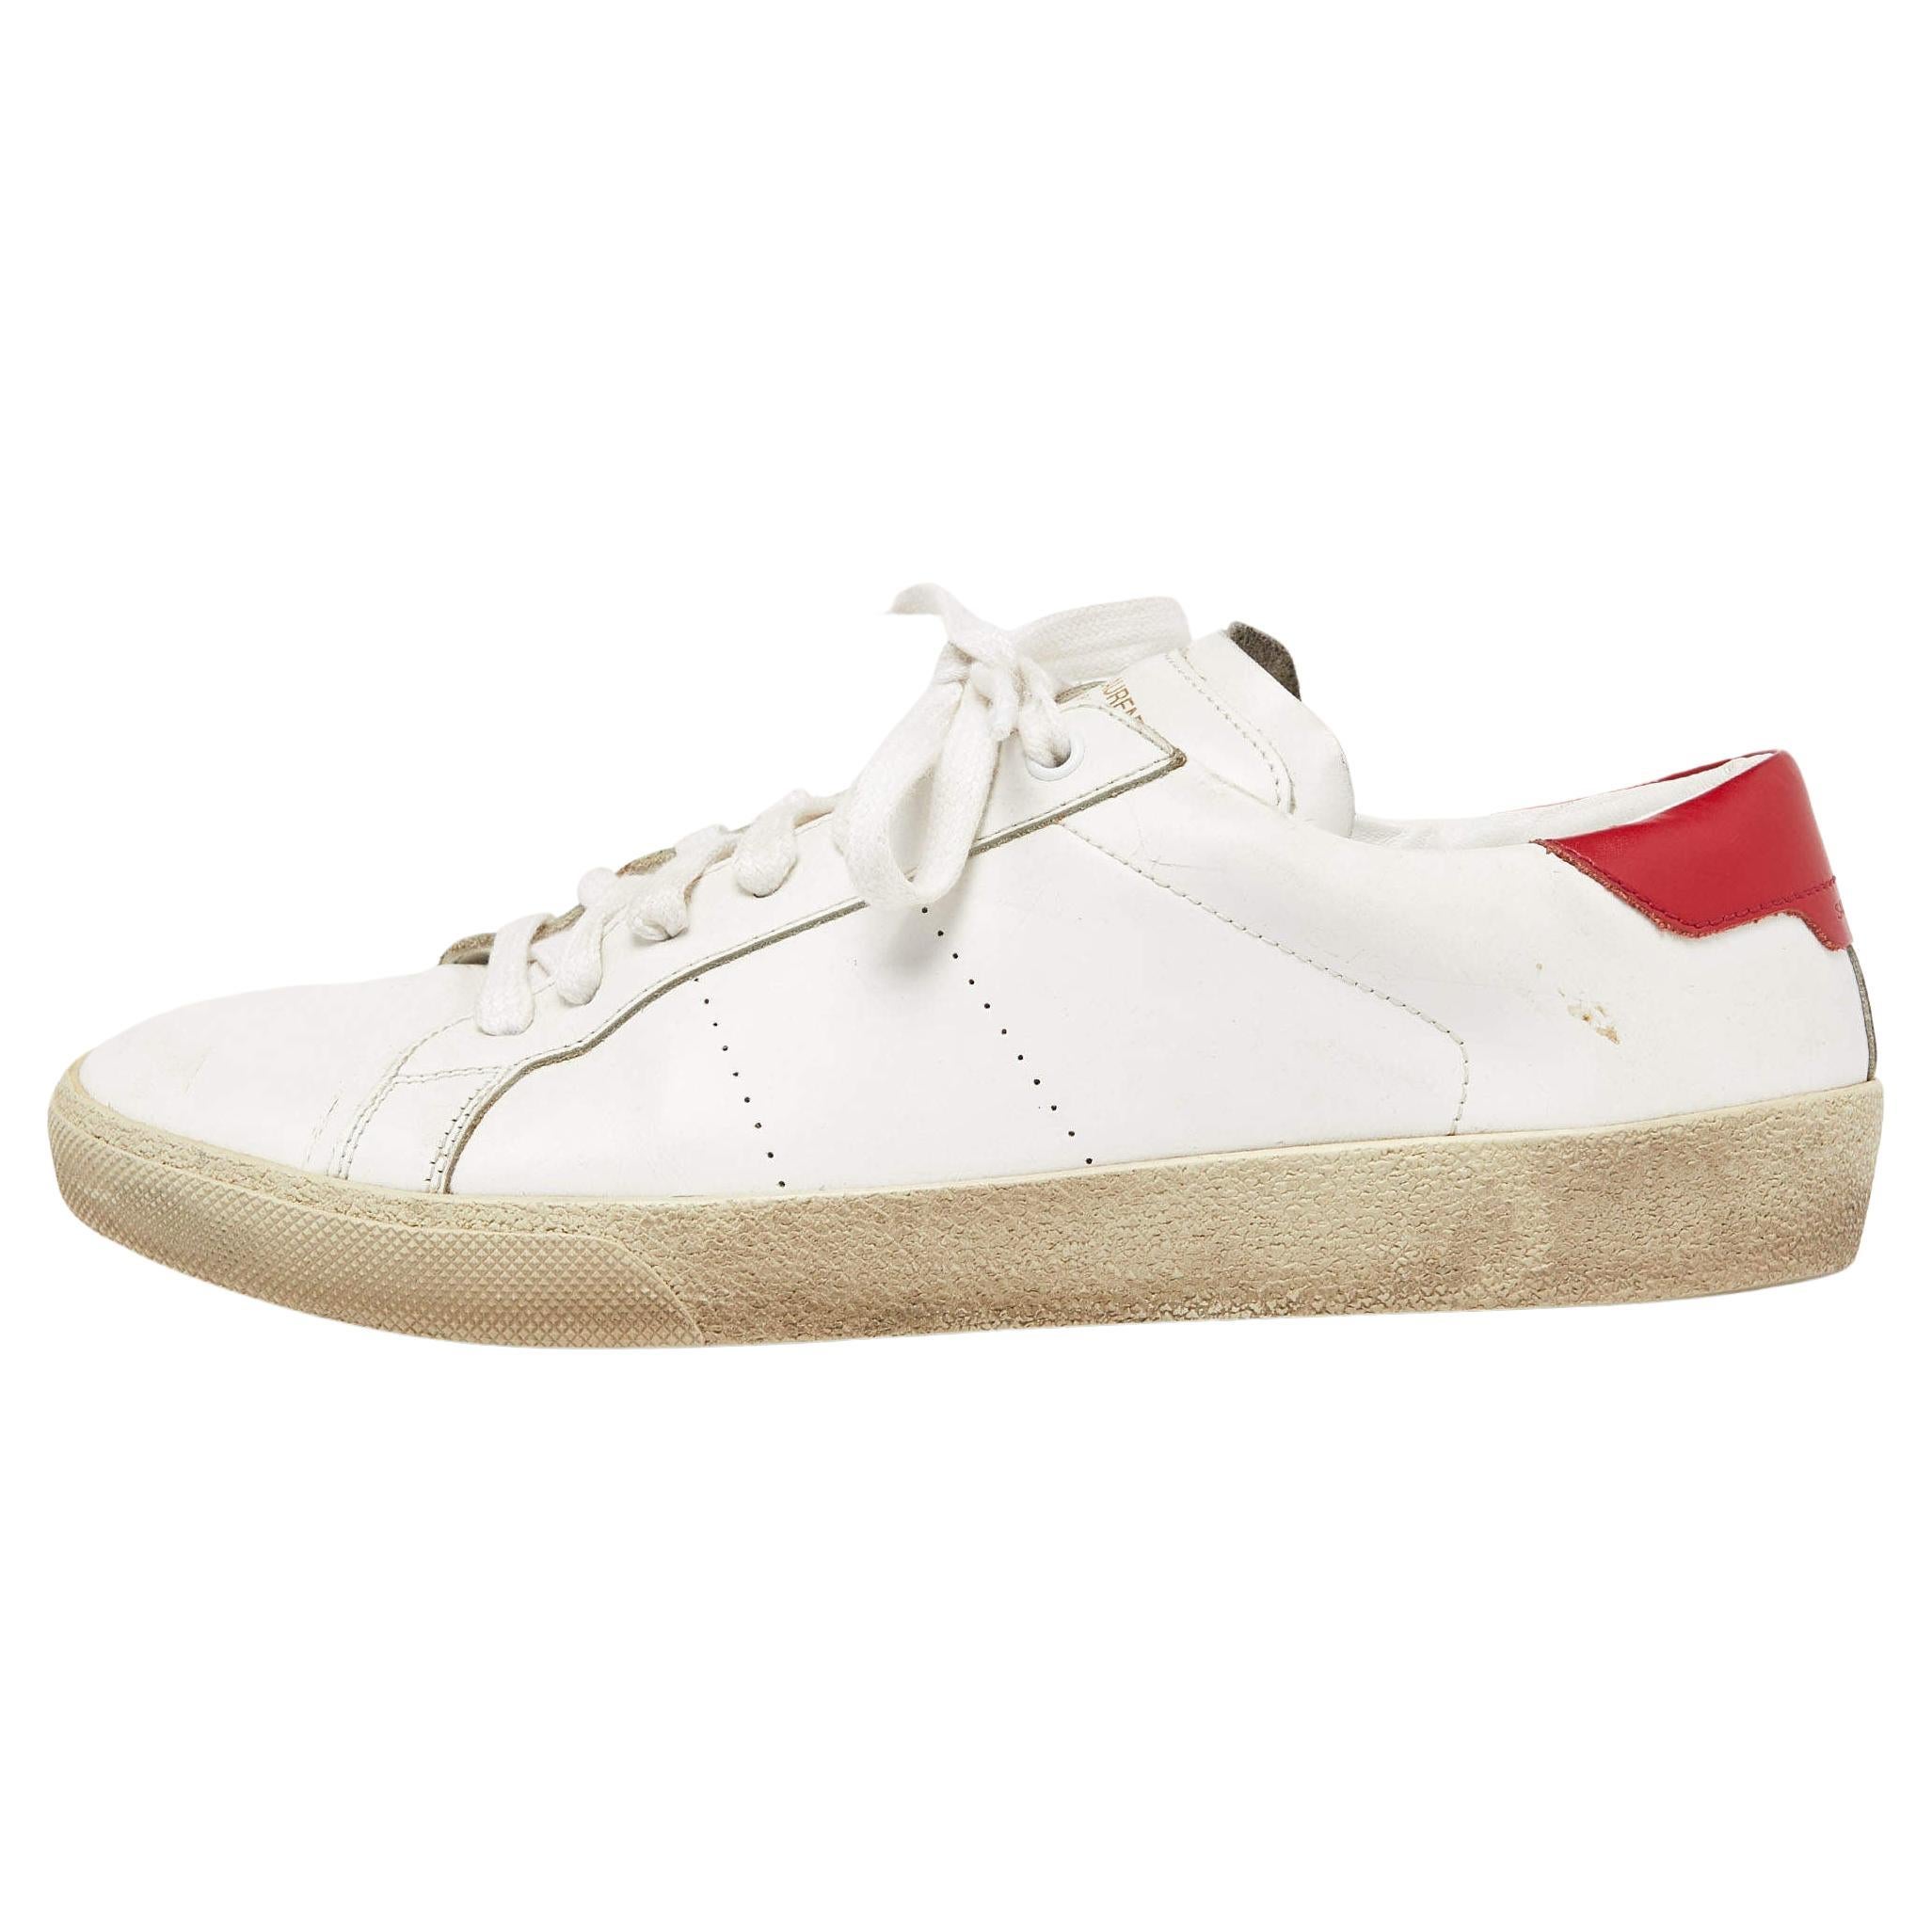 Saint Laurent White Leather Lace Up Sneakers Size 43 For Sale